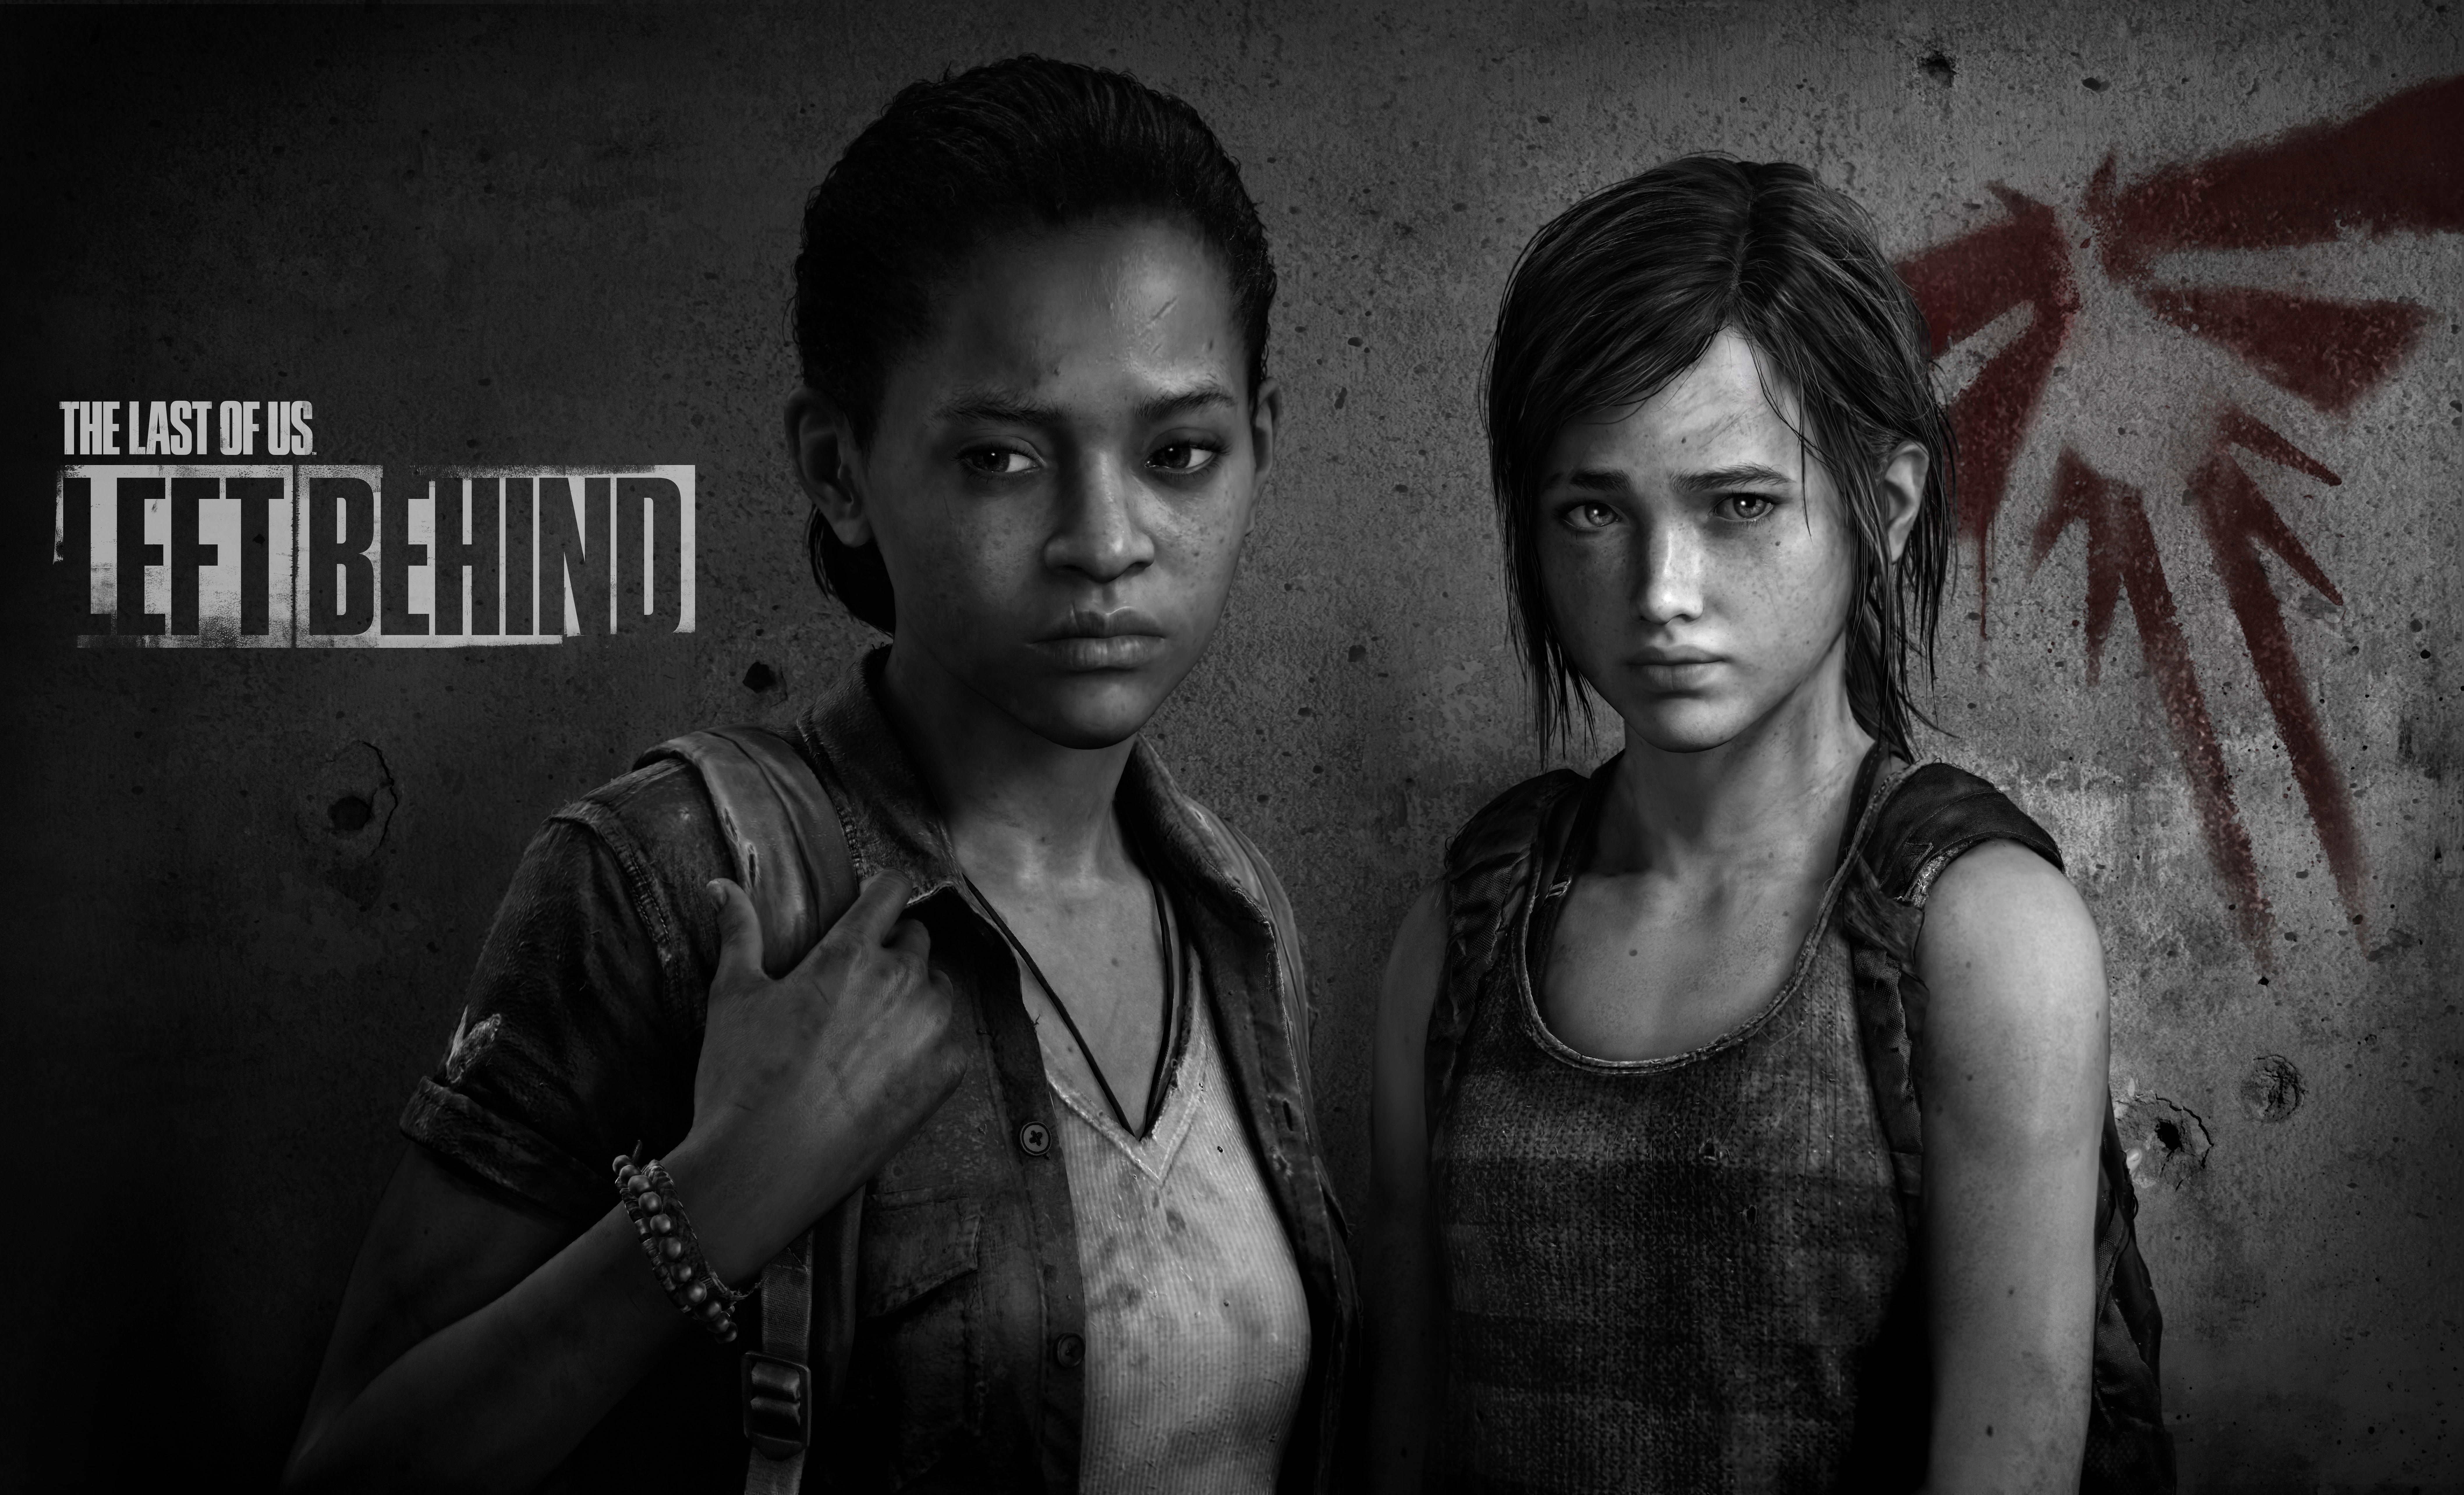 the last of us wallpaper,black and white,human,movie,photography,monochrome